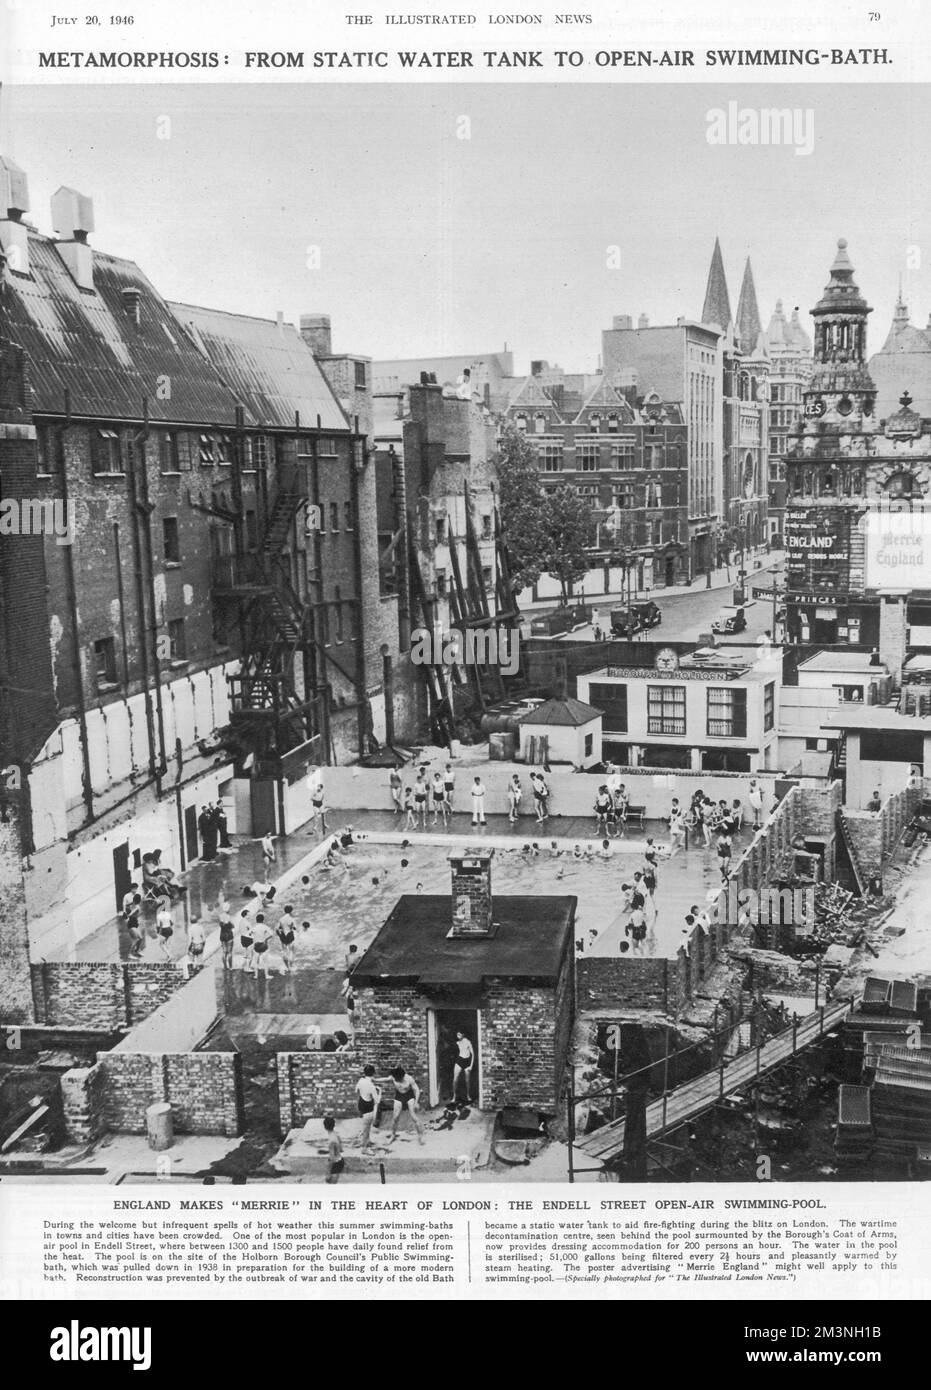 A view of the open air swimming pool in Endell Street, Holborn, London, on the site of Holborn Borough Council's Public Swimming bath which was pulled down in 1938 in preparation for the building of a more modern bath.  Reconstruction was prevented by the outbreak of war and the cavity of the old Bath became a static water tank to aid fire-fighting during the blitz in London.  The wartime decontamination centre, seen behind the pool surmounted by the Borough's Coat of Arms, provided dressing accommodation for 200 persons an hour.   Now part of the Oasis Sports Centre.     Date: 1946 Stock Photo